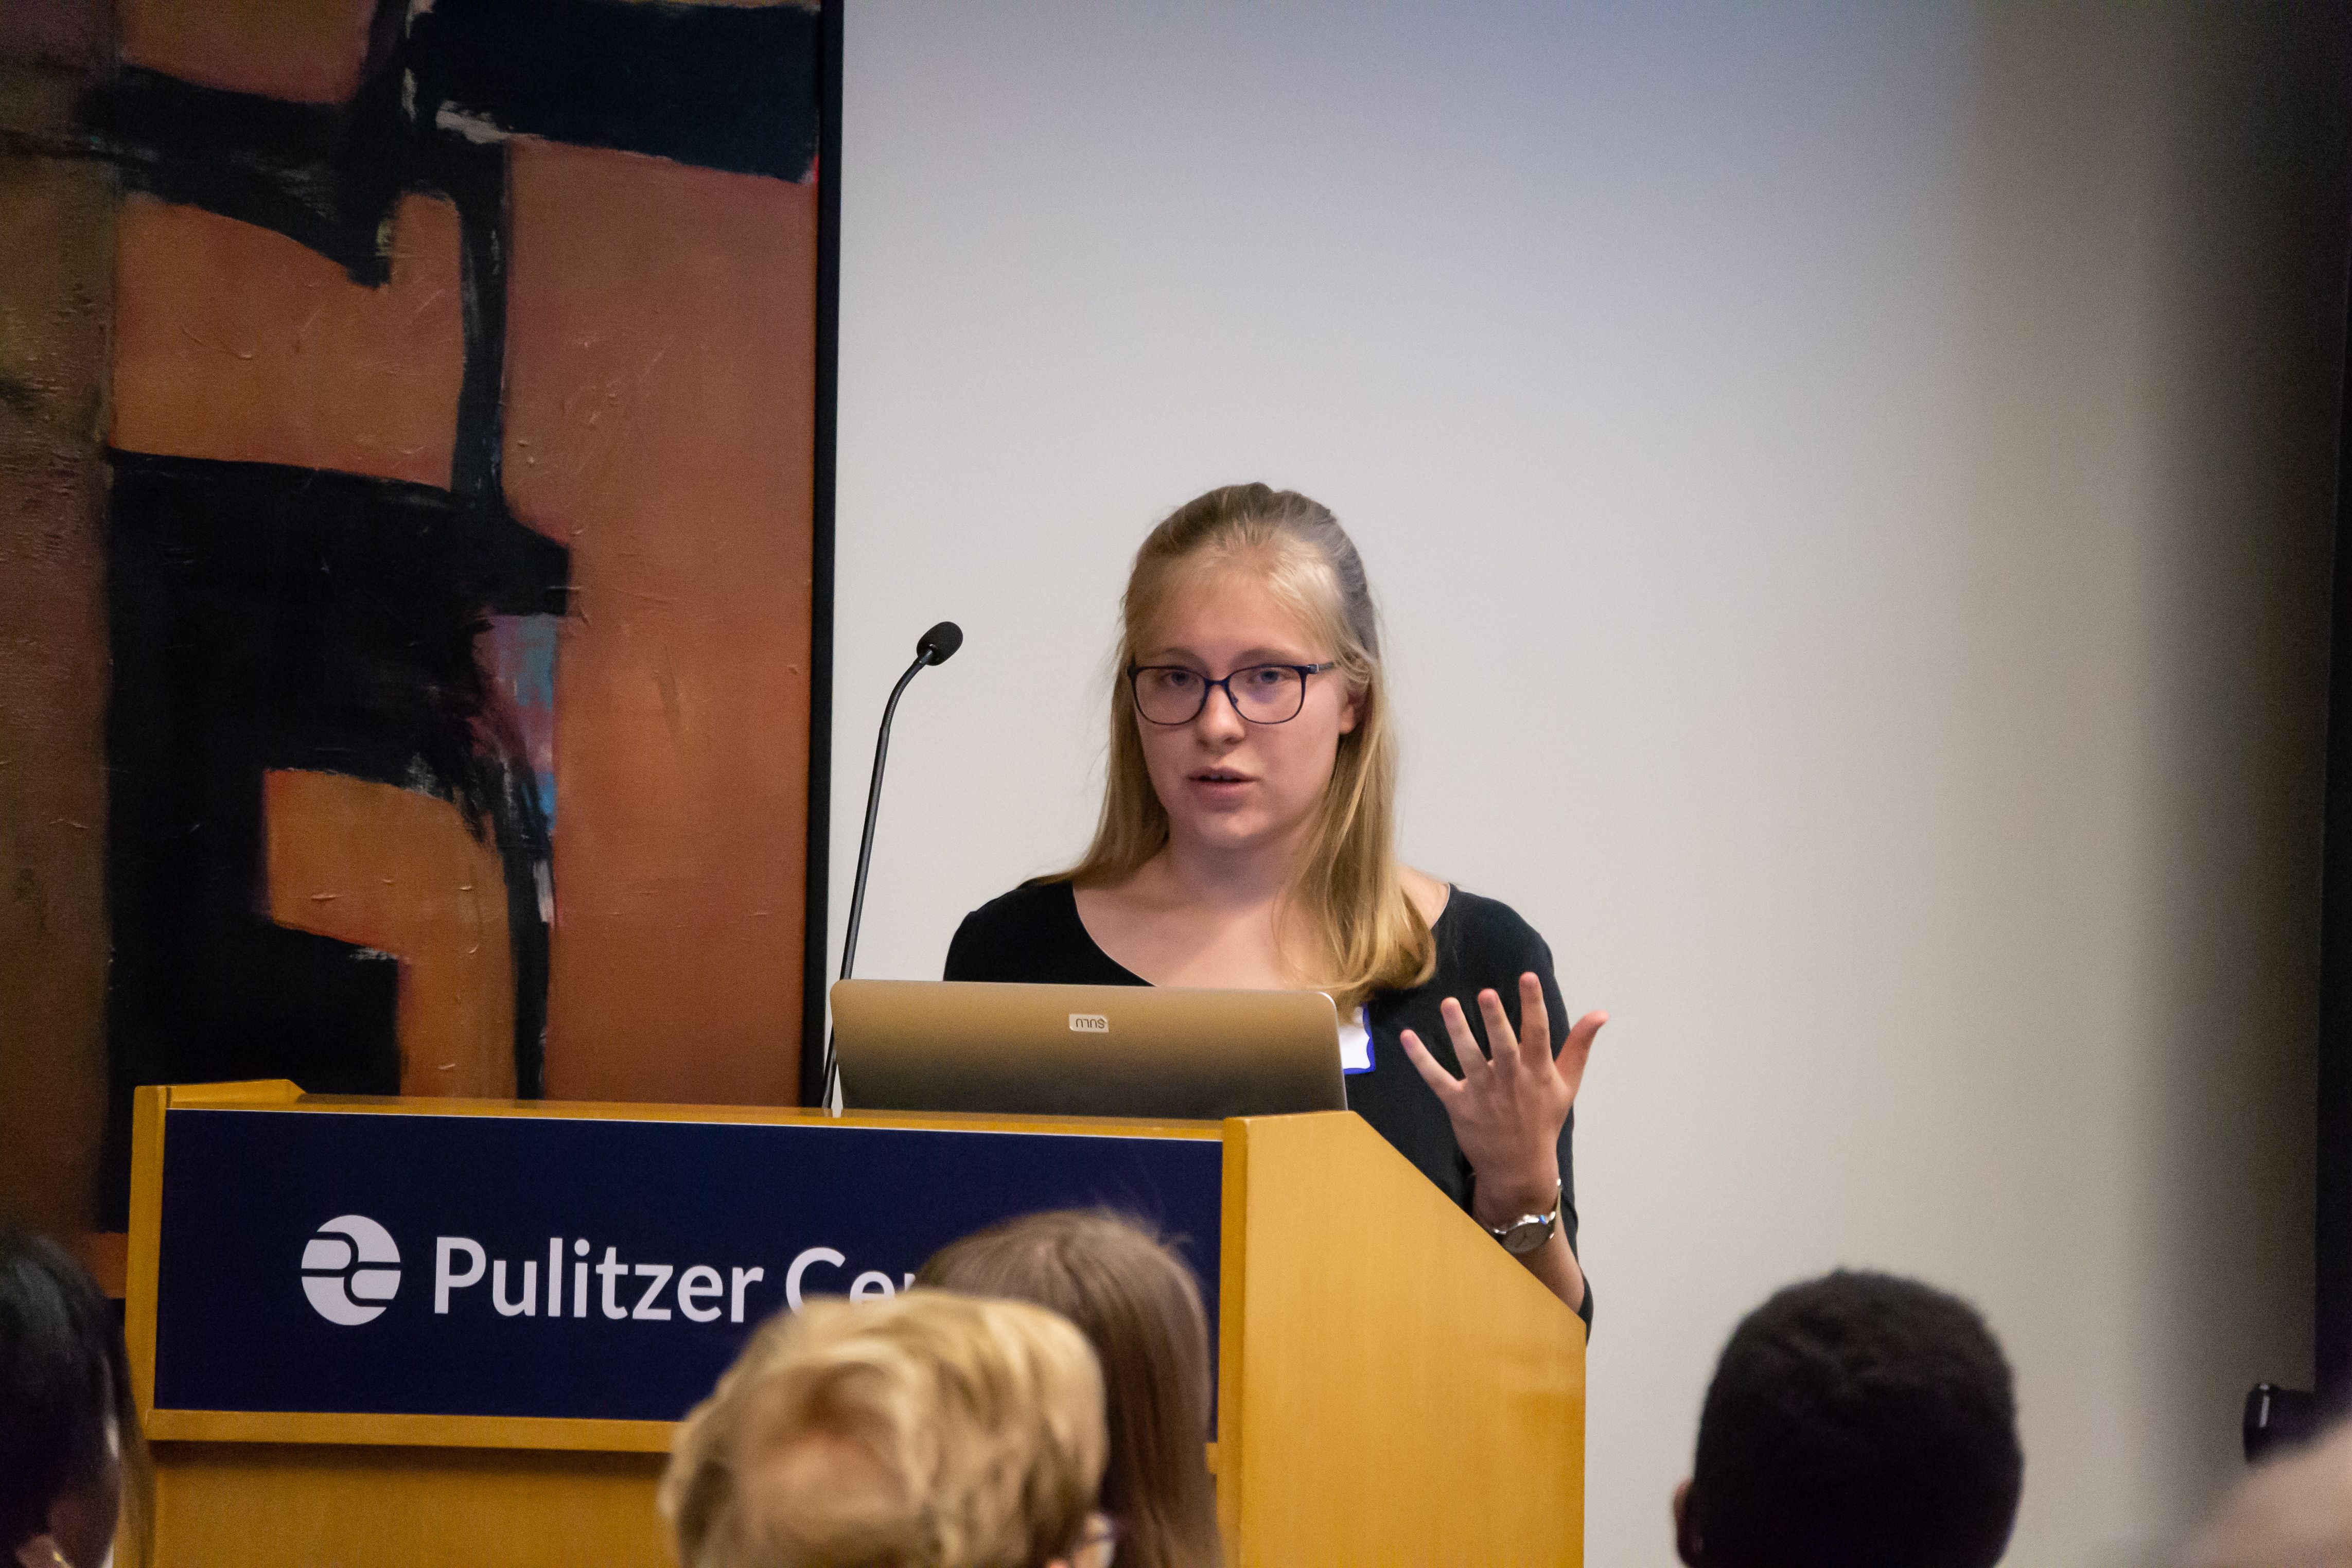 Lily Moore-Eissenberg (Yale University) discusses her project "Borderland Sisterhood" during the "Impact of Religion" panel on Day One of Washington Weekend. Image by Nora Moraga-Lewy. United States, 2019.